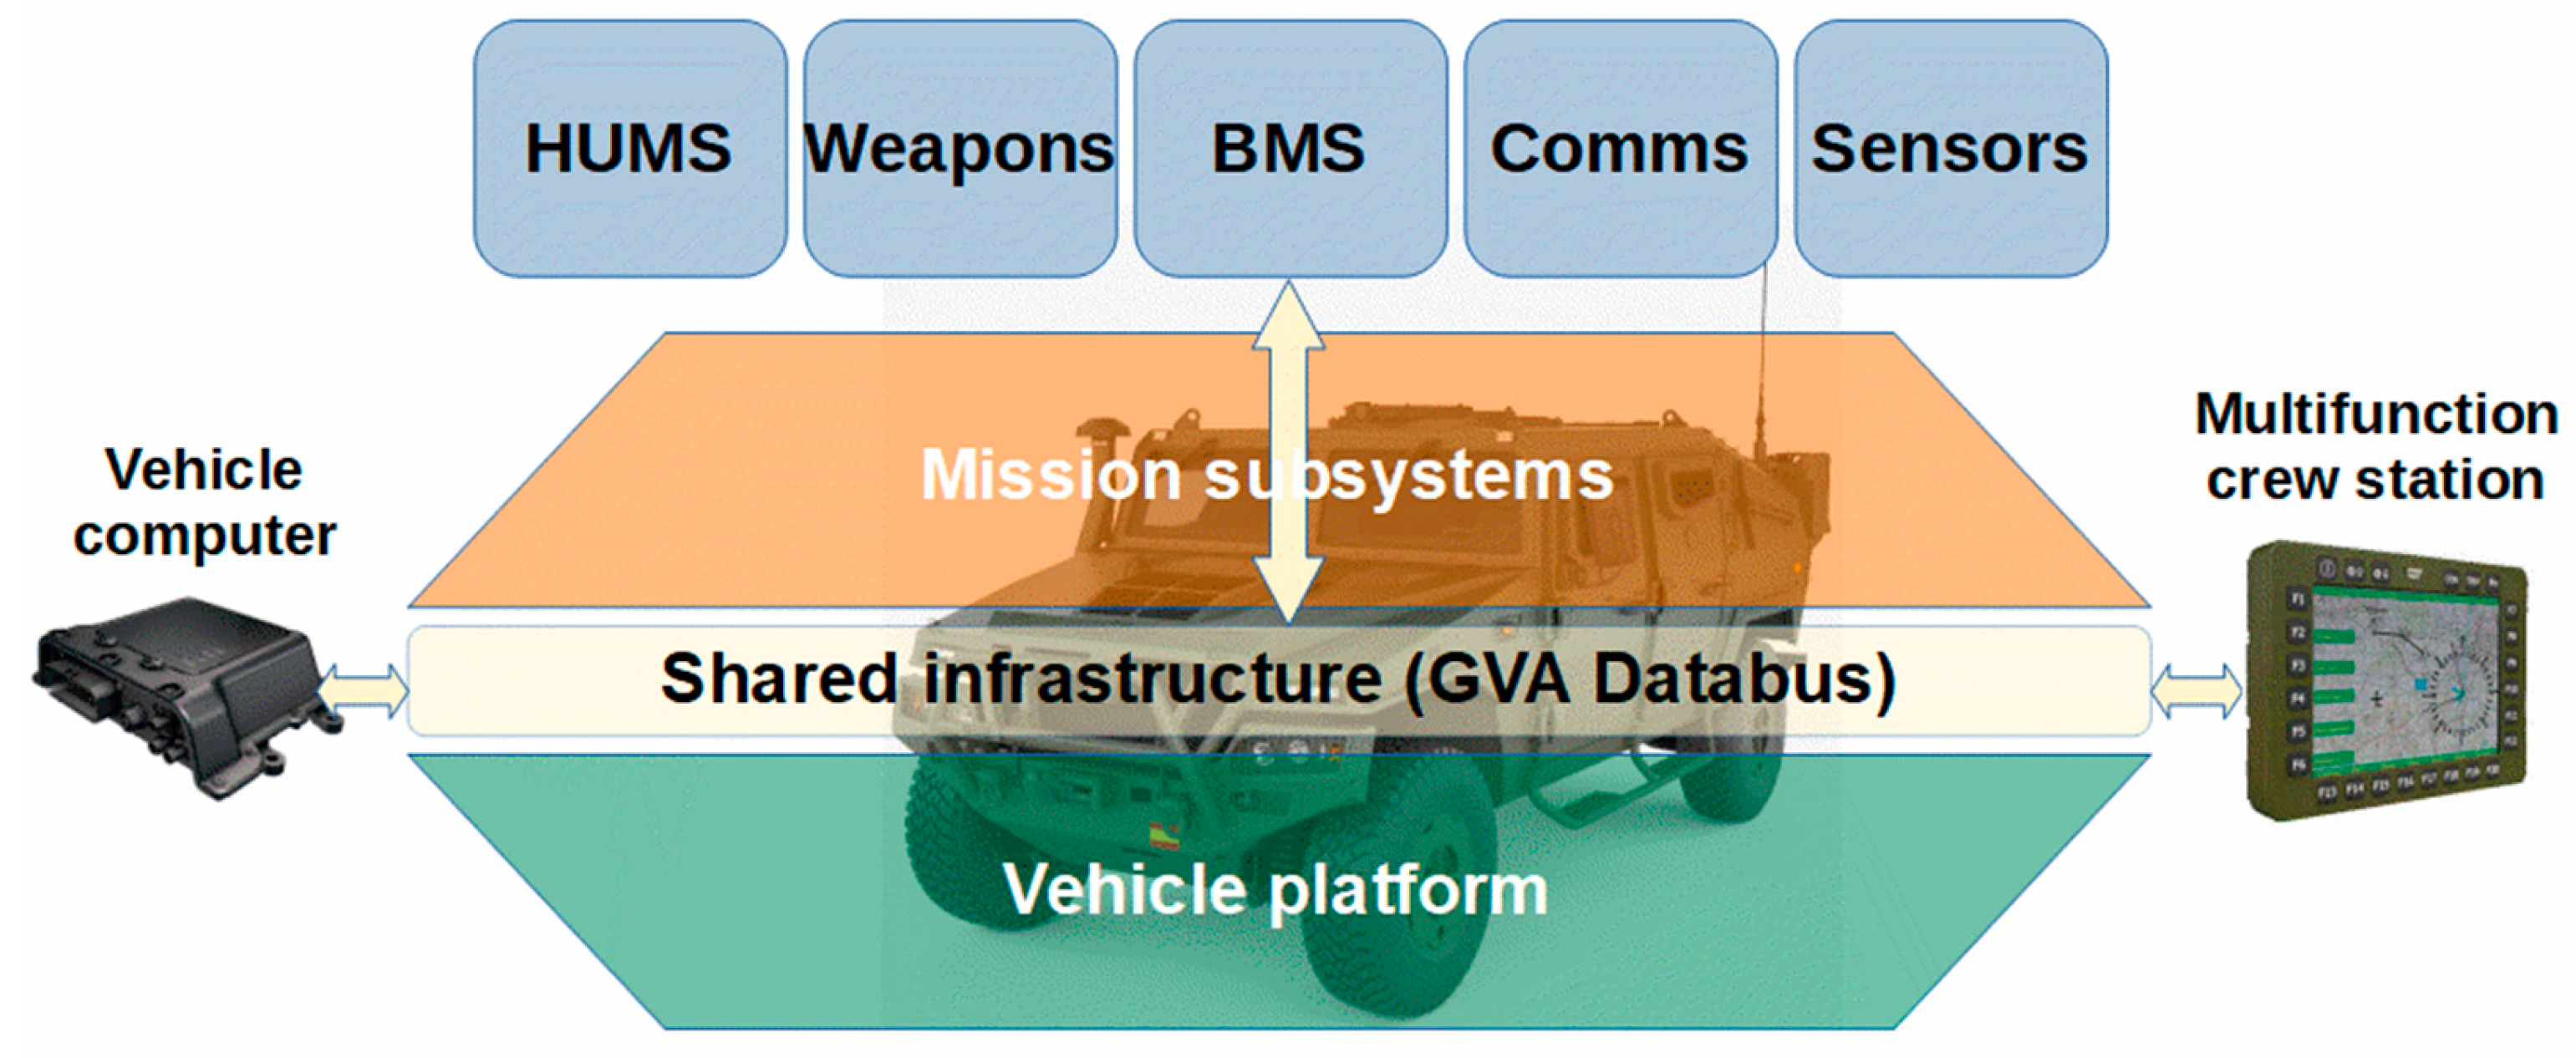 Sensors | Free Full-Text | Data Acquisition for Condition Monitoring in  Tactical Vehicles: On-Board Computer Development